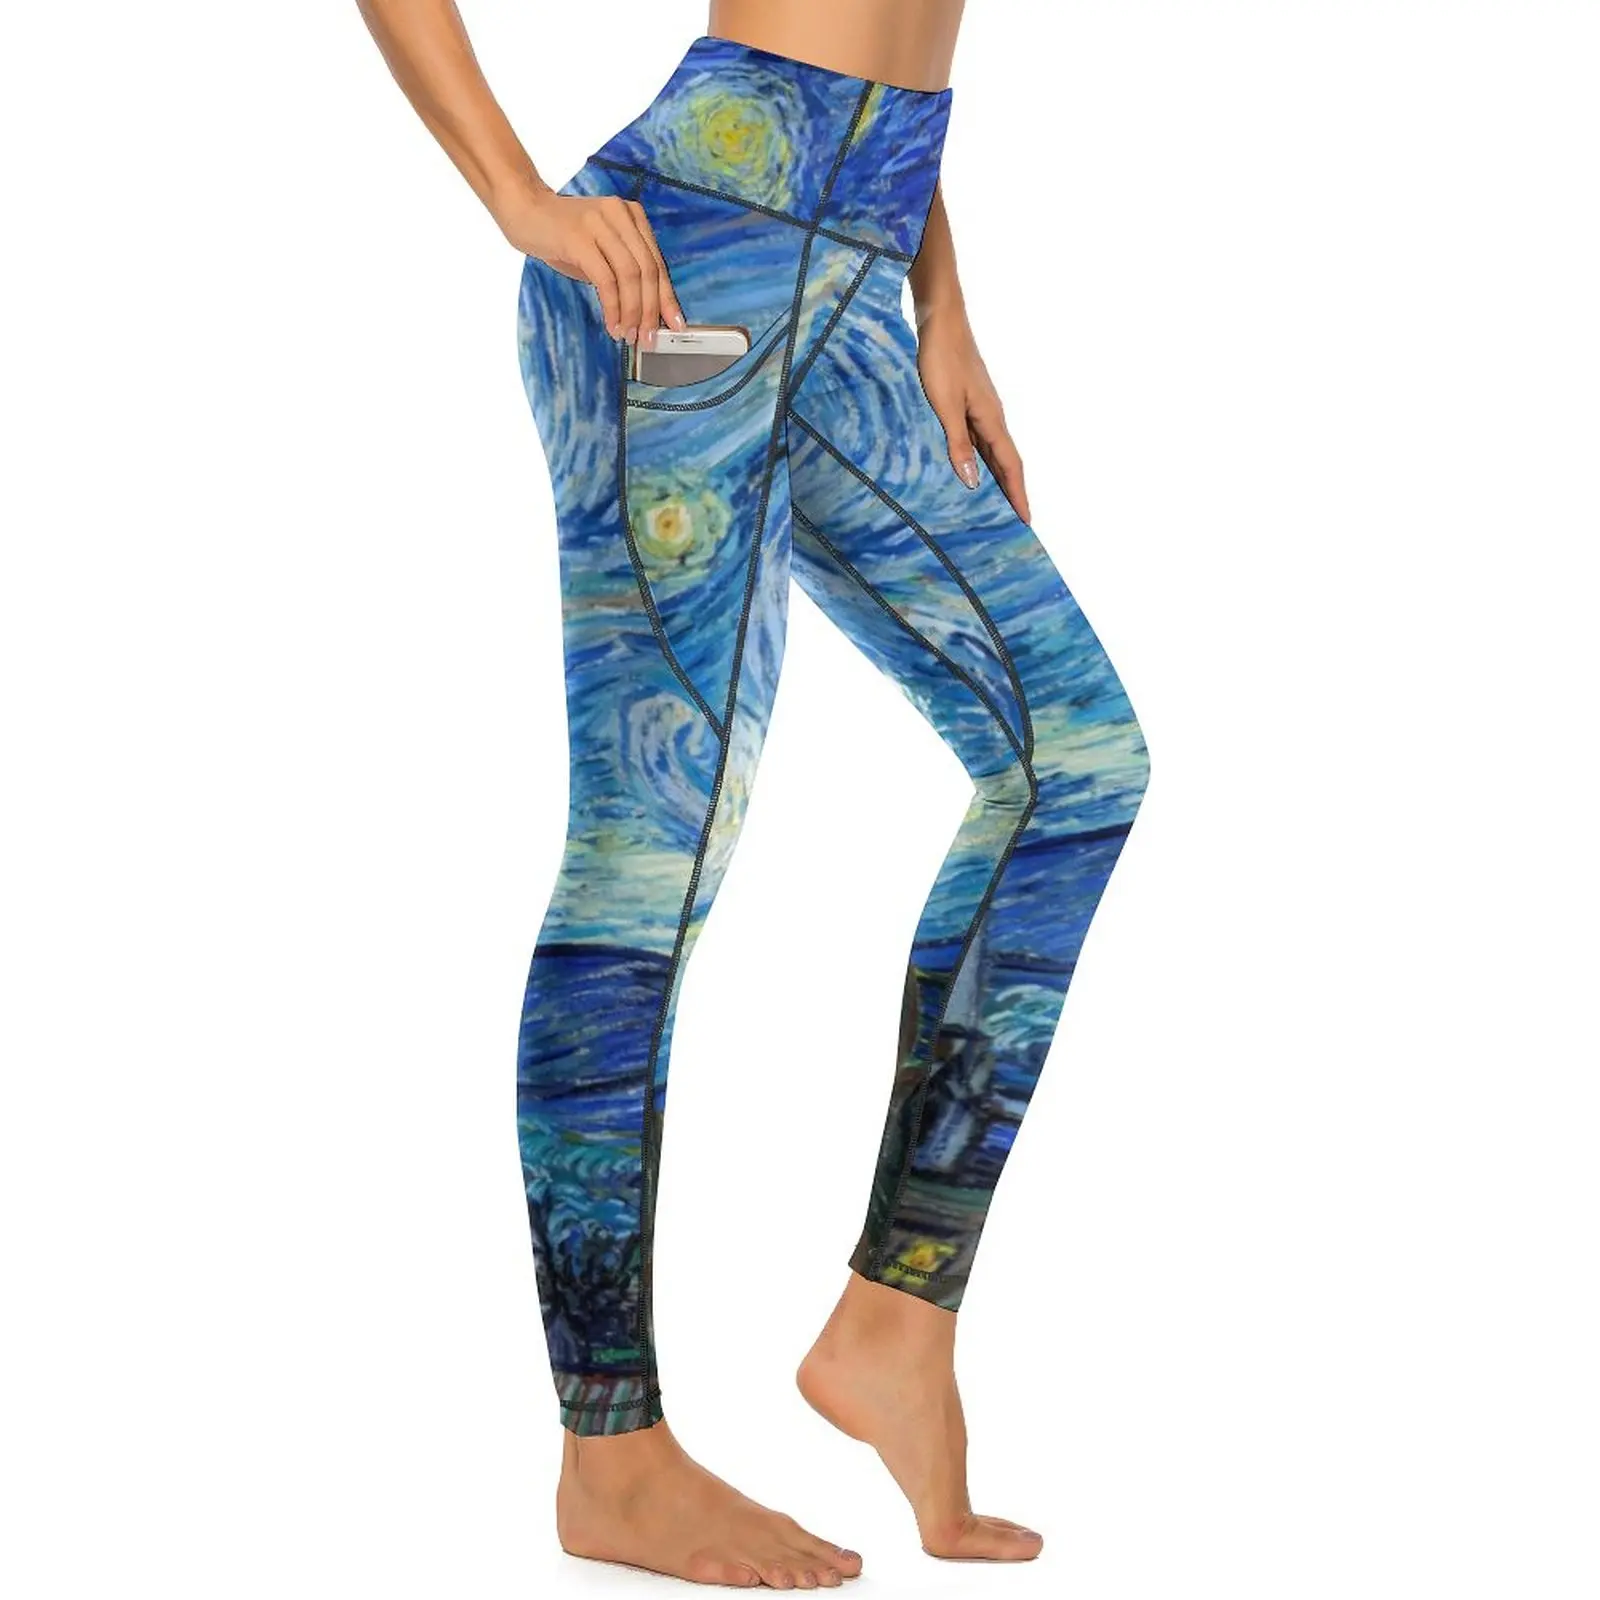 

The Starry Night Leggings Vincent Van Gogh High Waist Yoga Pants Vintage Stretch Leggins With Pockets Workout Gym Sports Tights